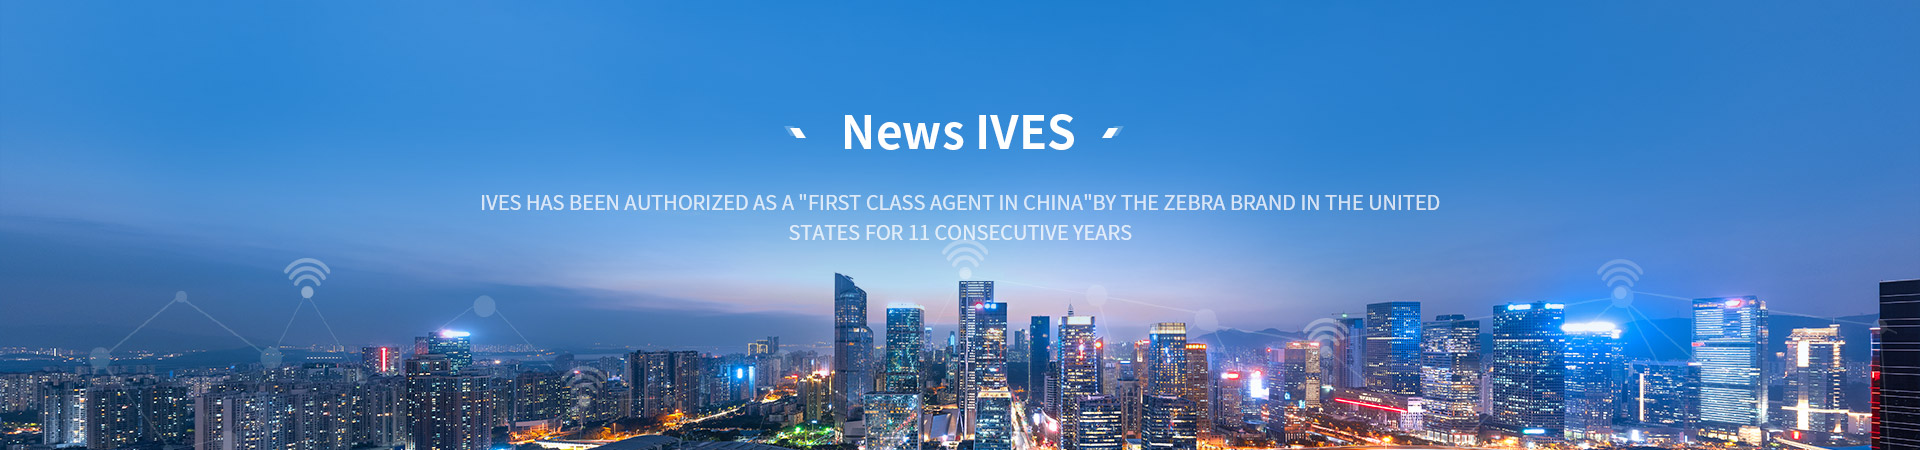 IVES has been authorized as a "First Class Agent in China"by the Zebra brand in the United States for 11 consecutive years